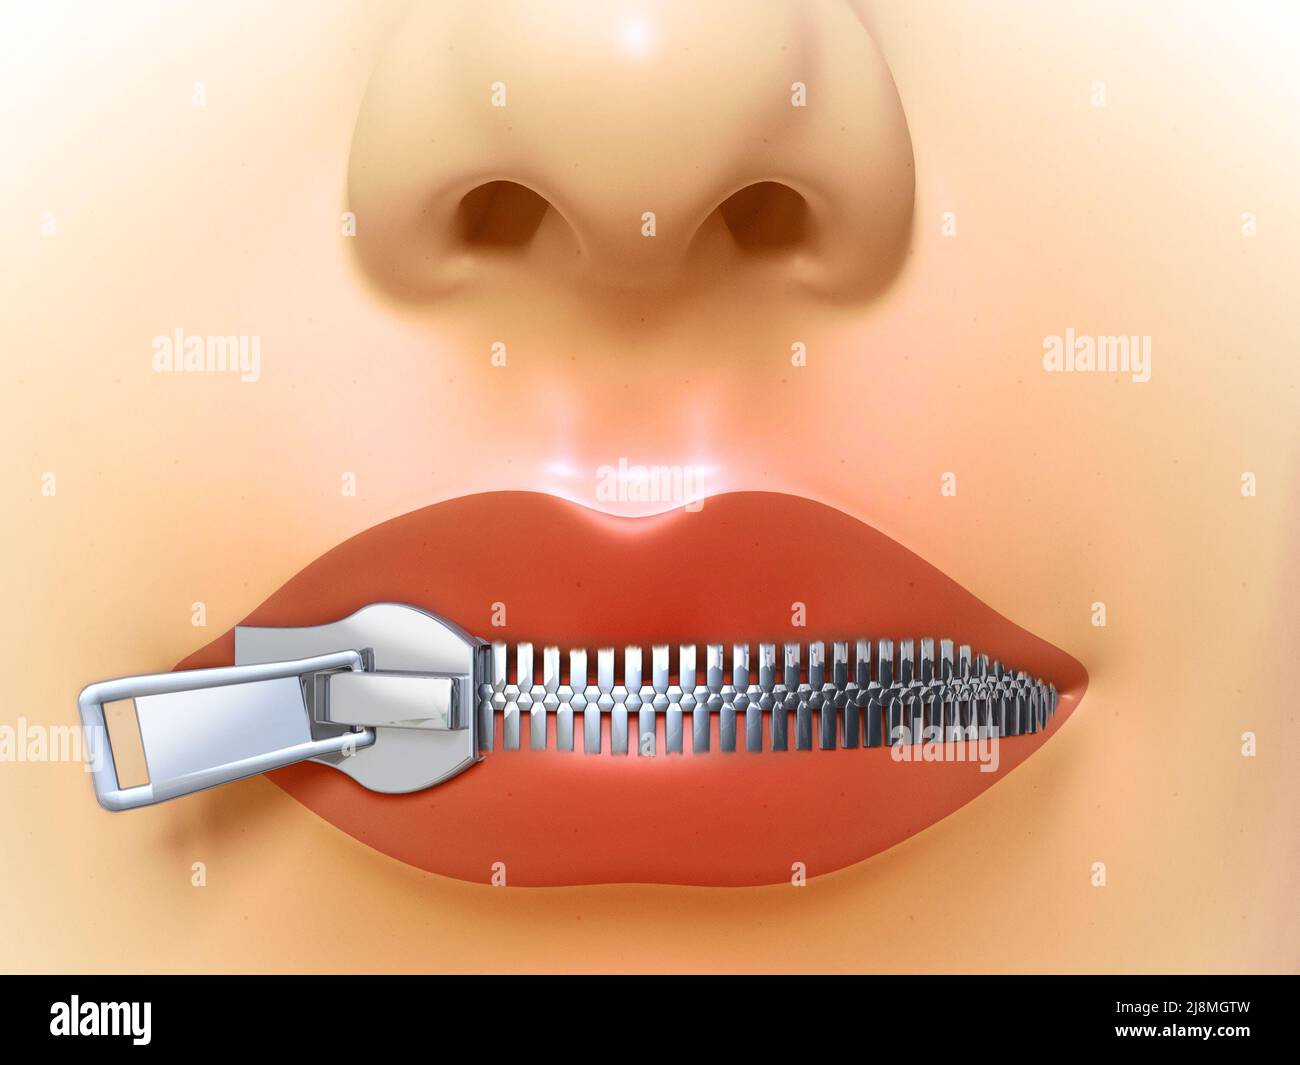 Female mouth closed by a metal zipper. Digital illustration. Stock Photo